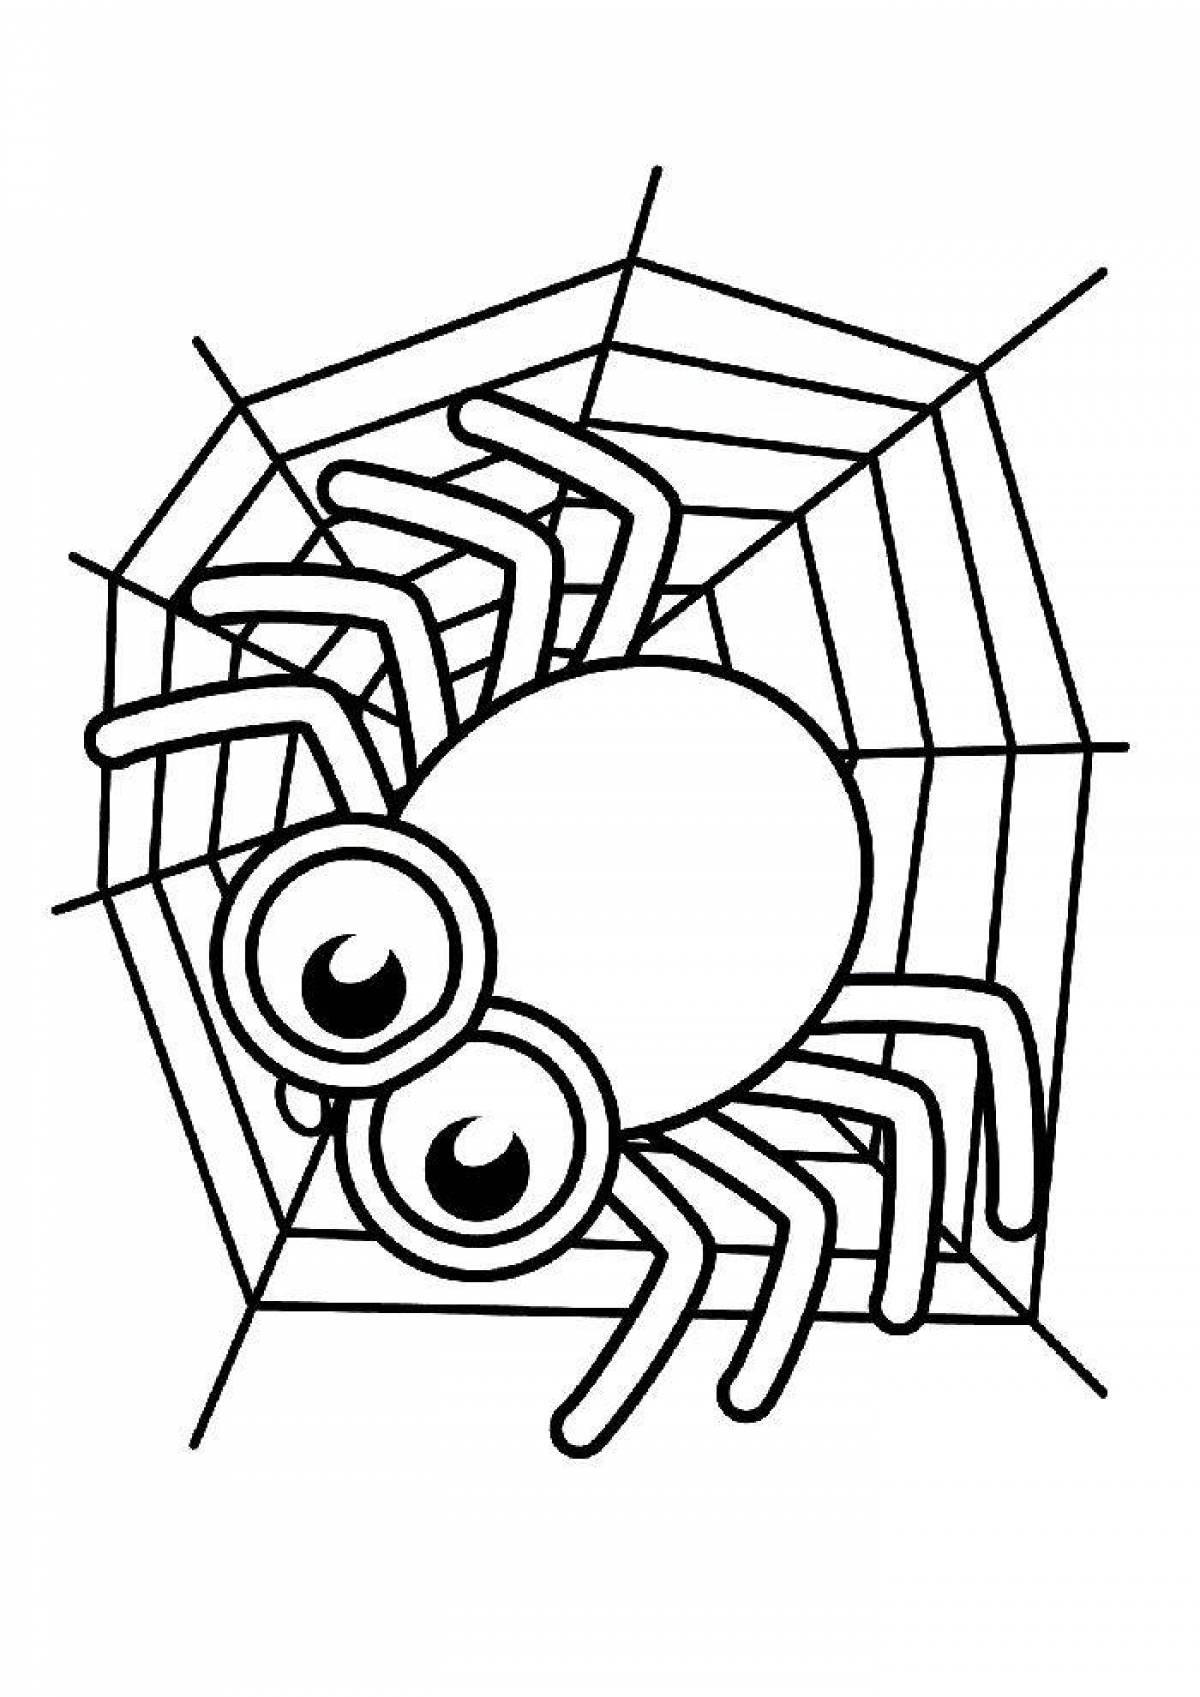 Amazing spider coloring page for kids